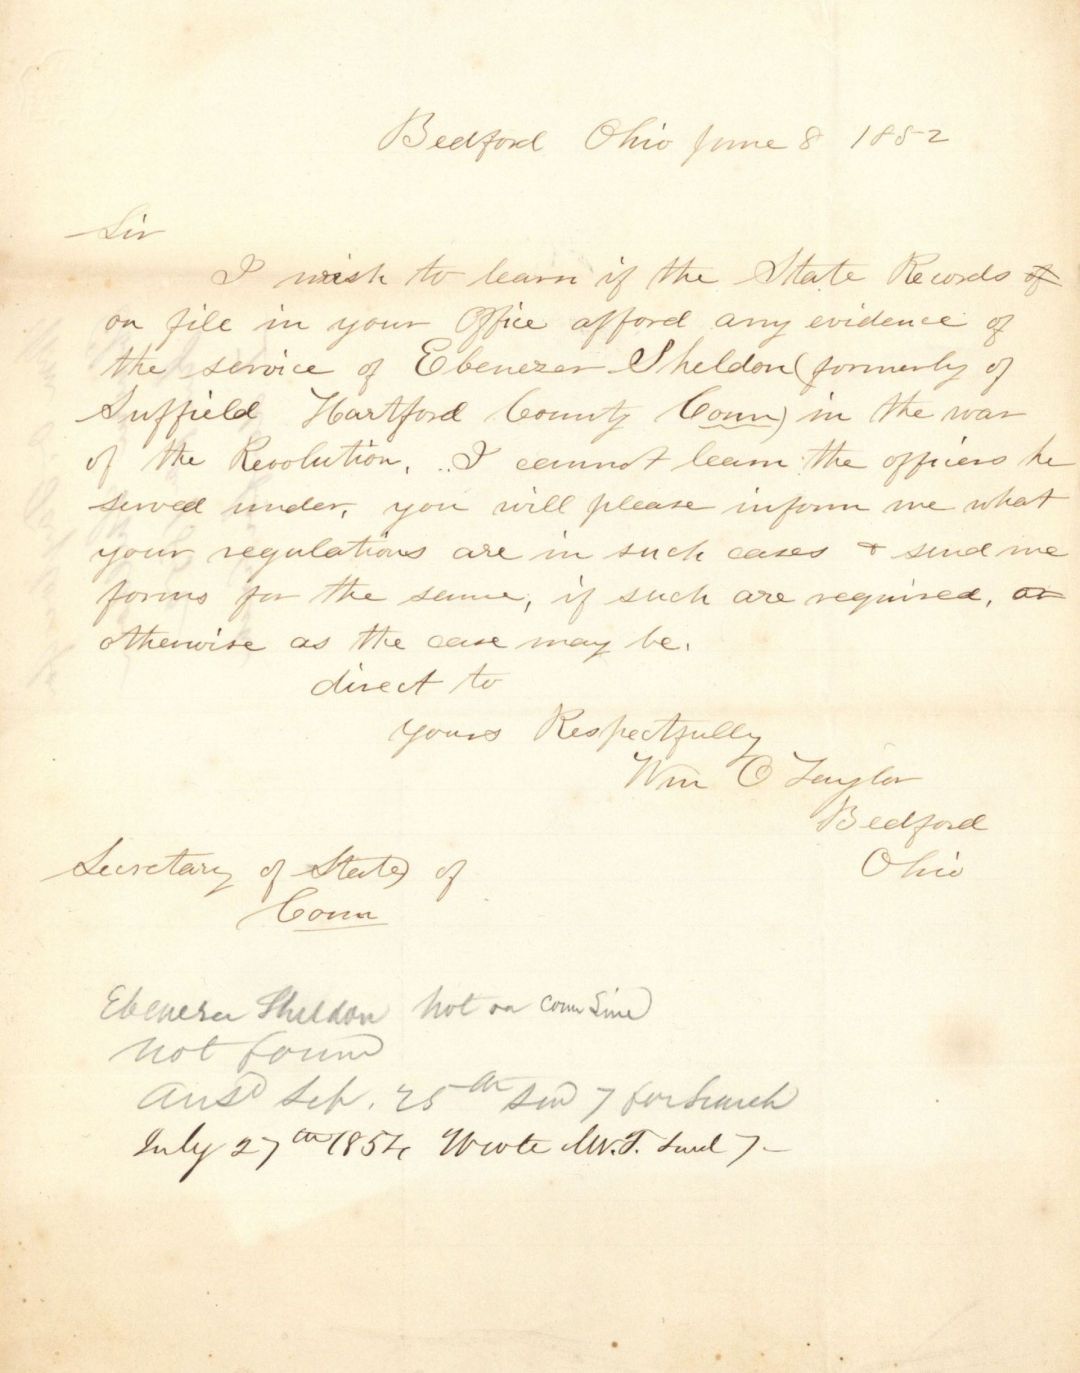 Secretary of State of Conn. Letter - 1852 dated Americana